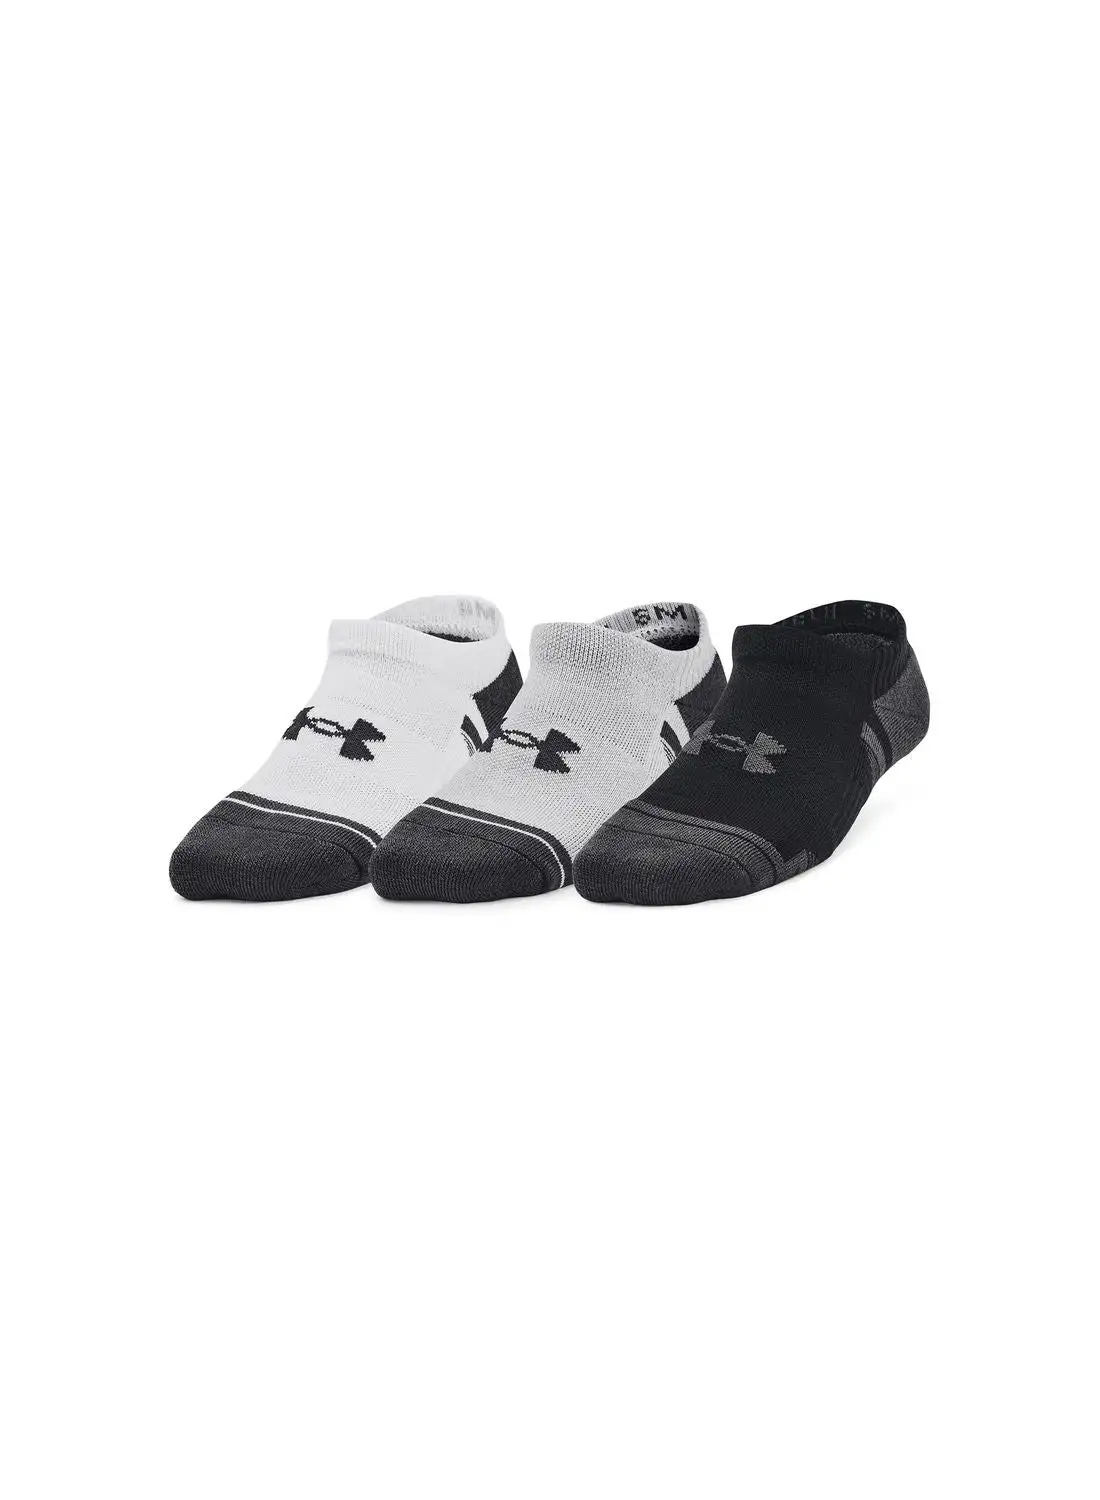 UNDER ARMOUR Kids' Performance Tech No Show Socks (Pack Of 3)